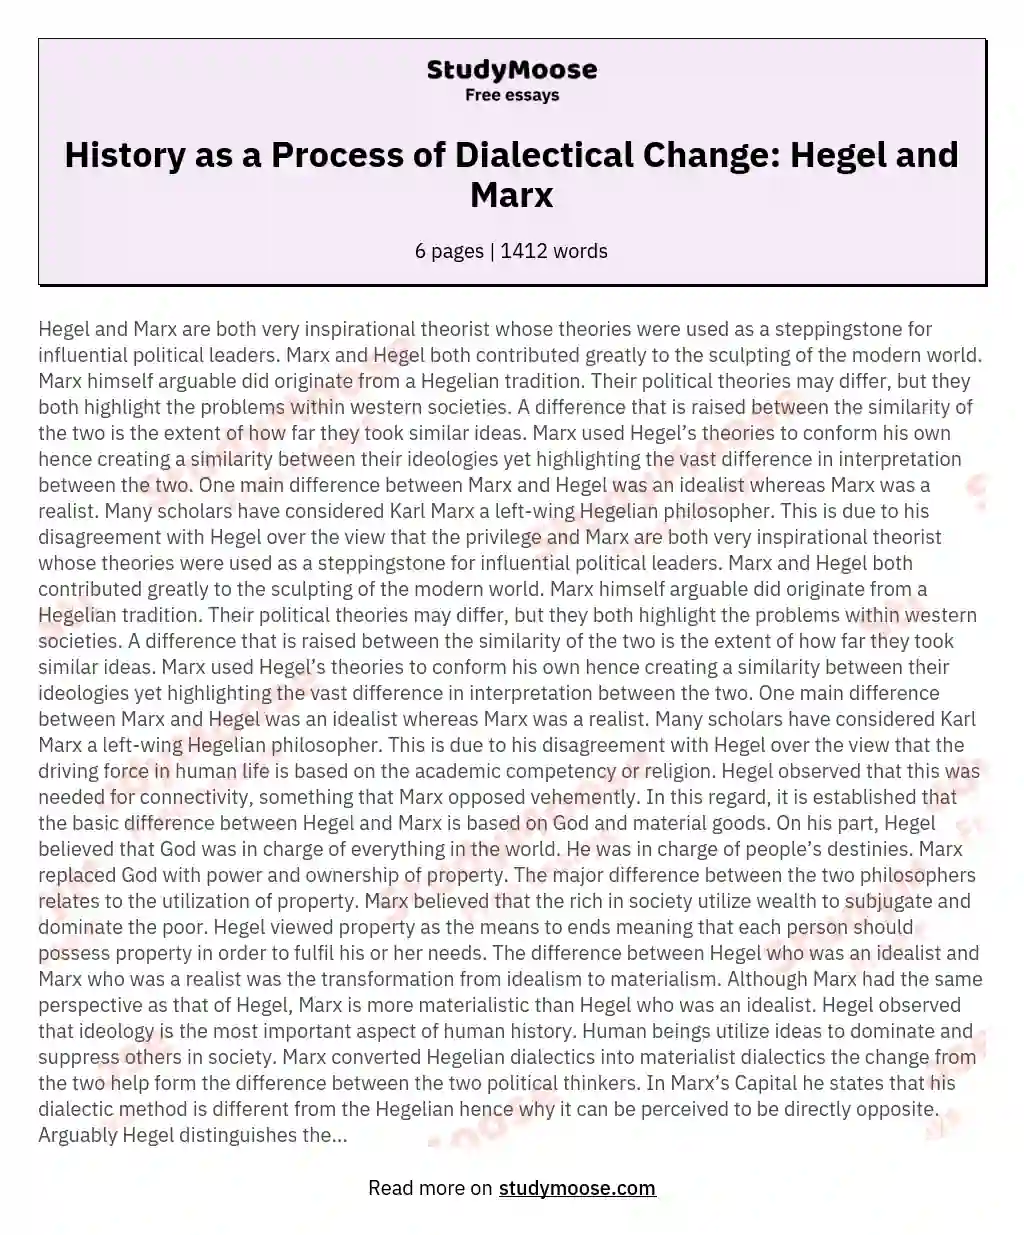 History as a Process of Dialectical Change: Hegel and Marx essay